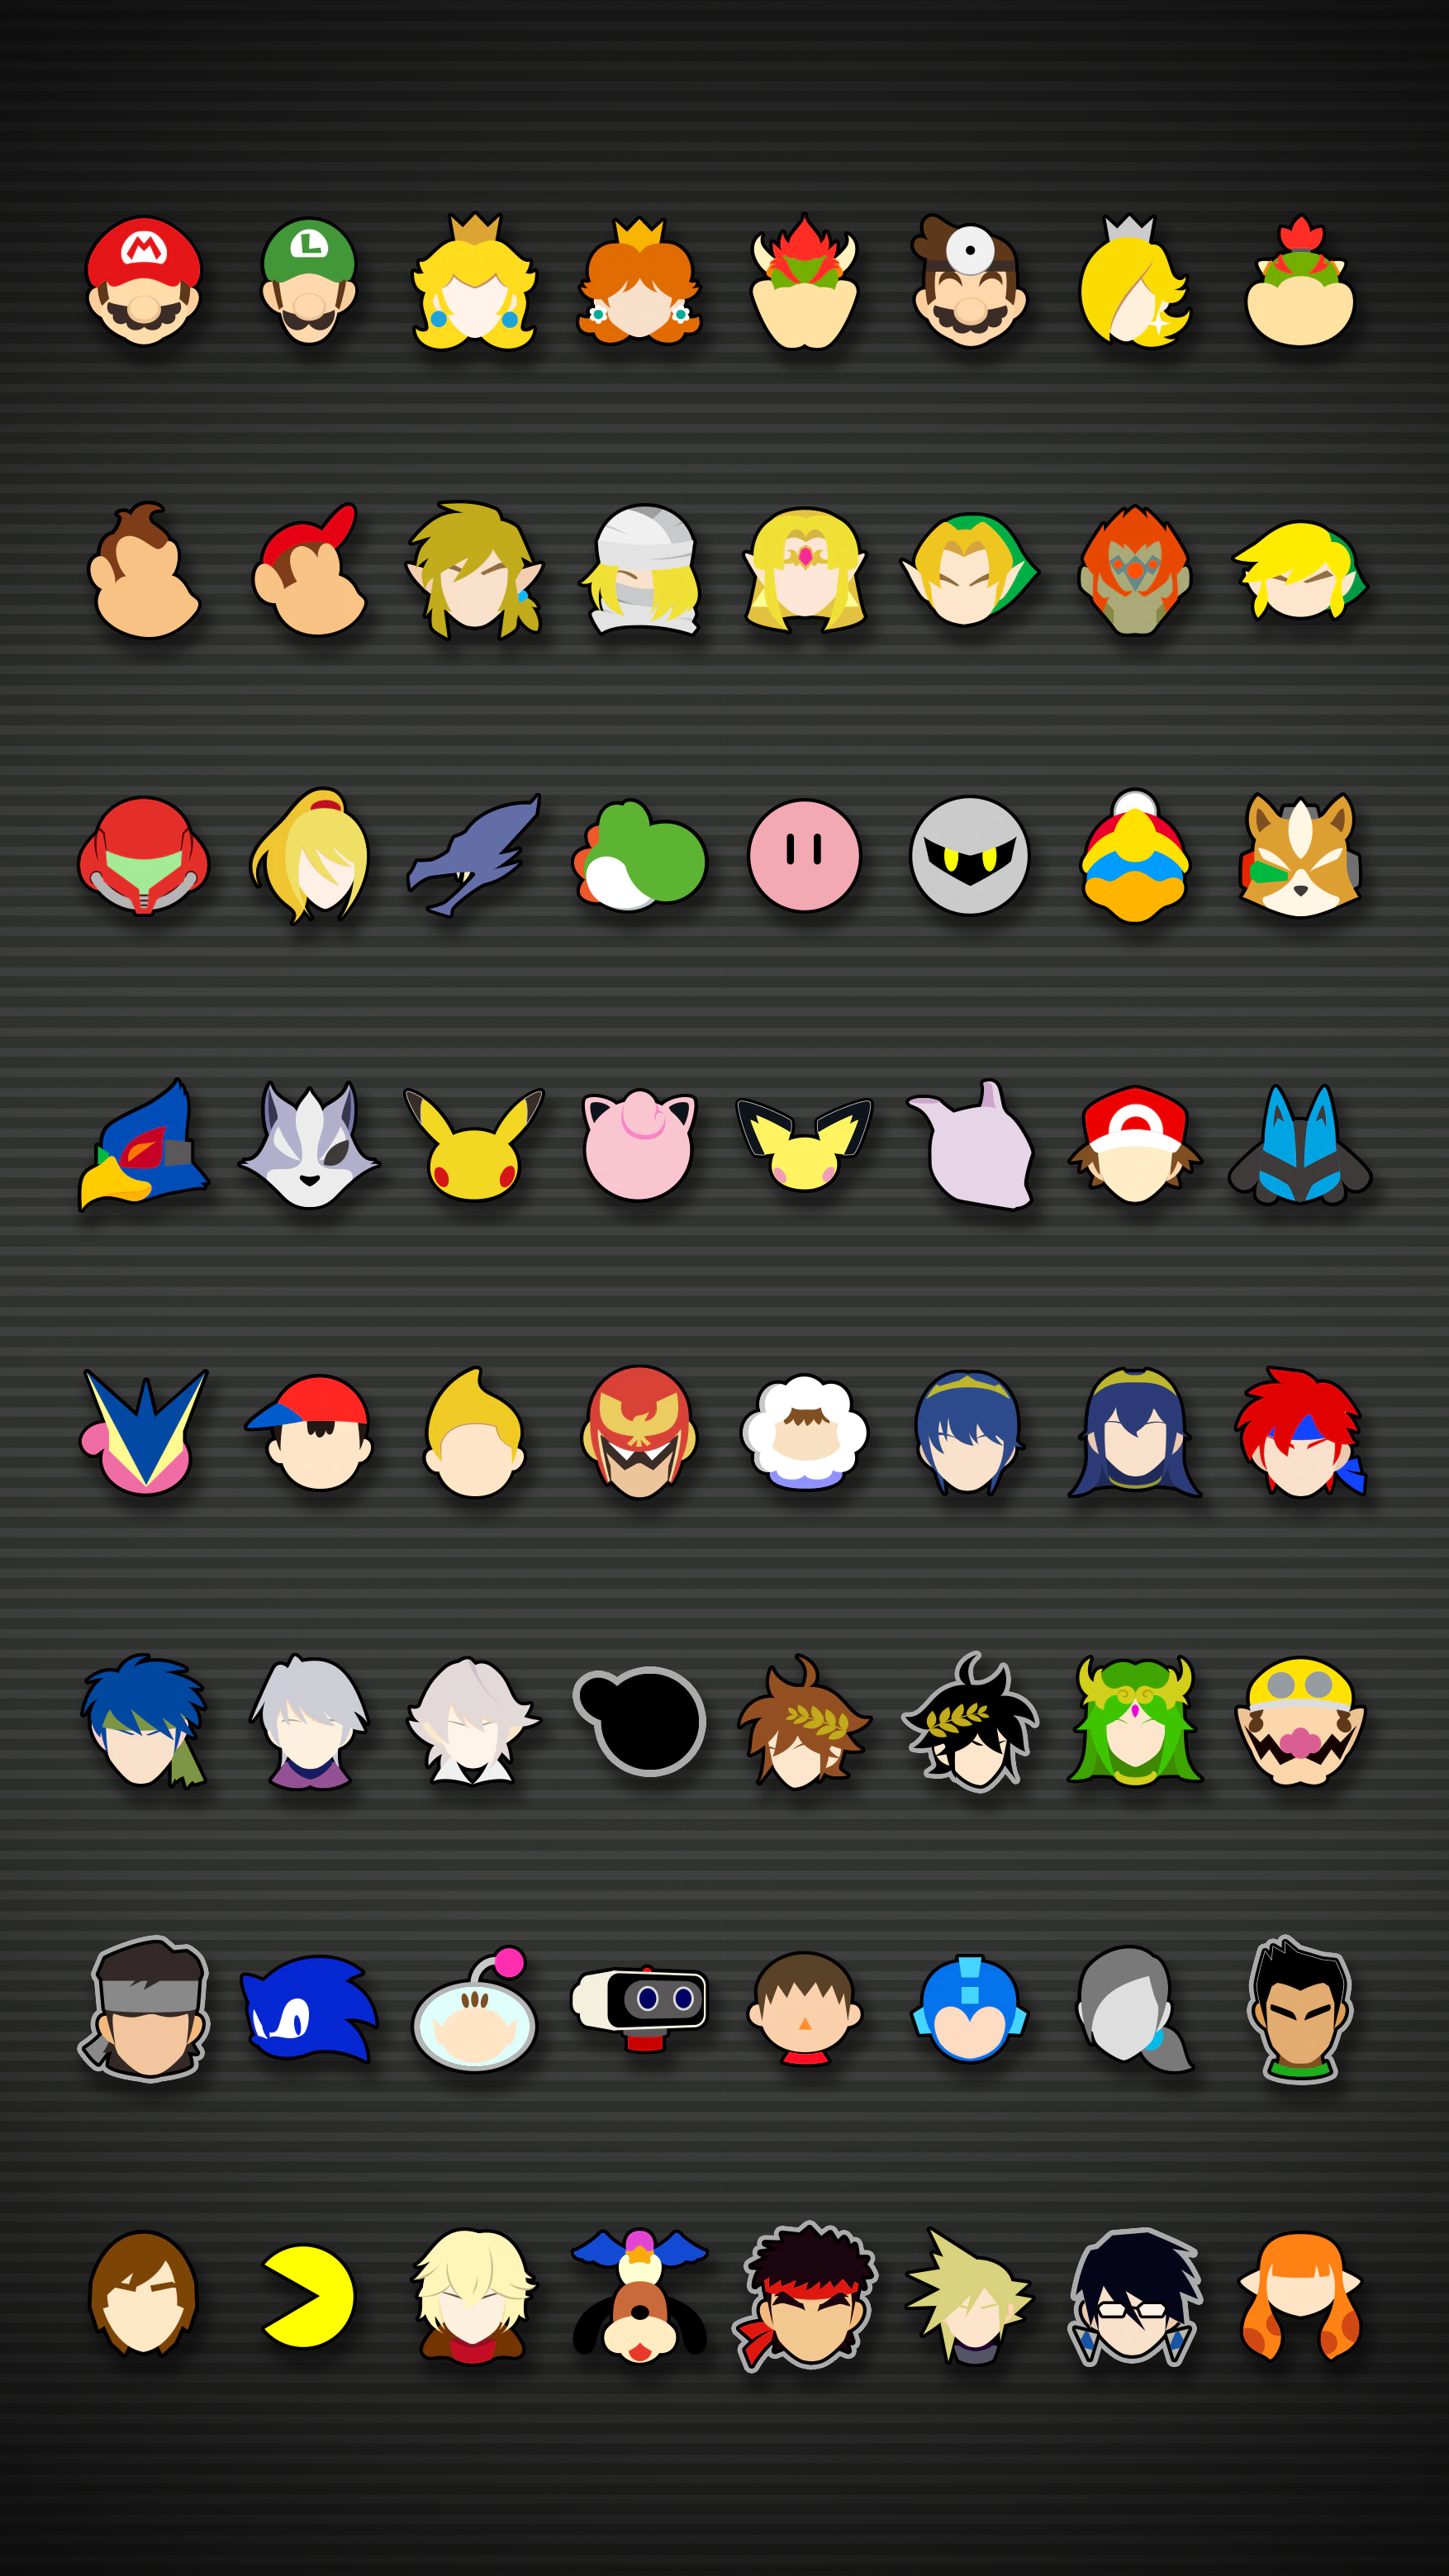 A phone wallpaper I made from the new Smash Ultimate Icon